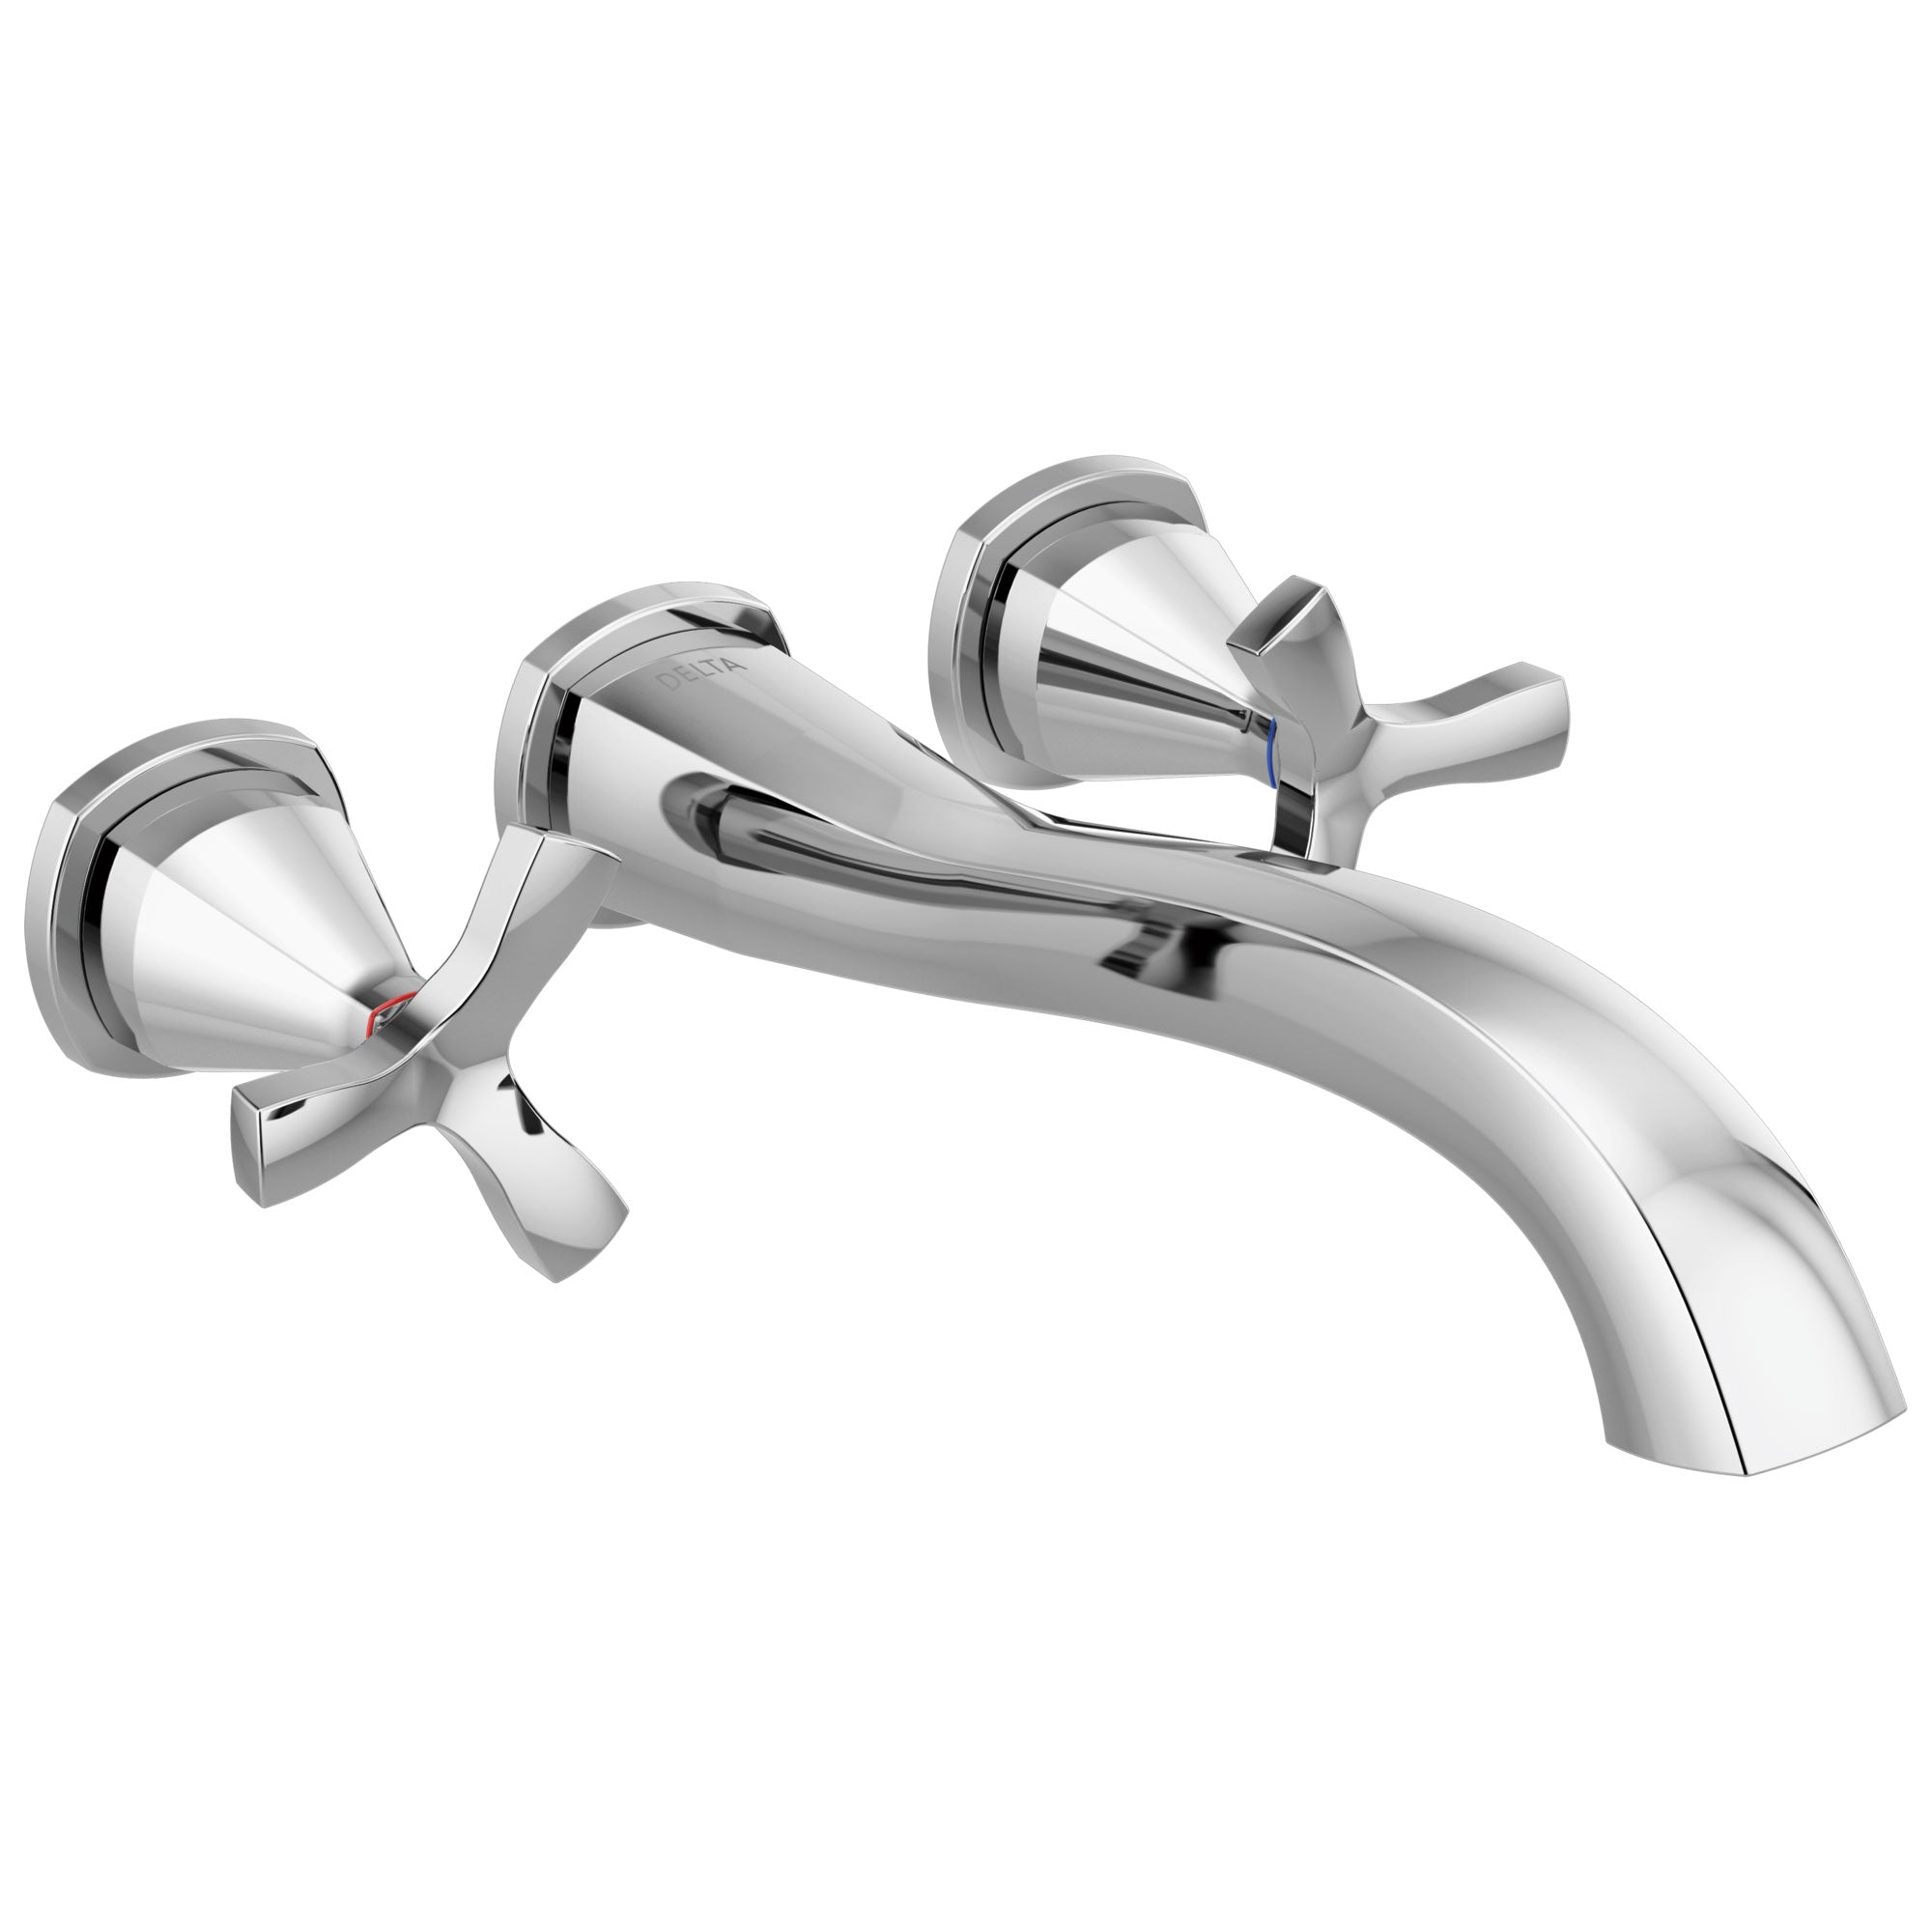 Delta Stryke Chrome Finish Cross Handle Wall Mounted Tub Filler Faucet Trim Kit (Requires Valve) DT57766WL